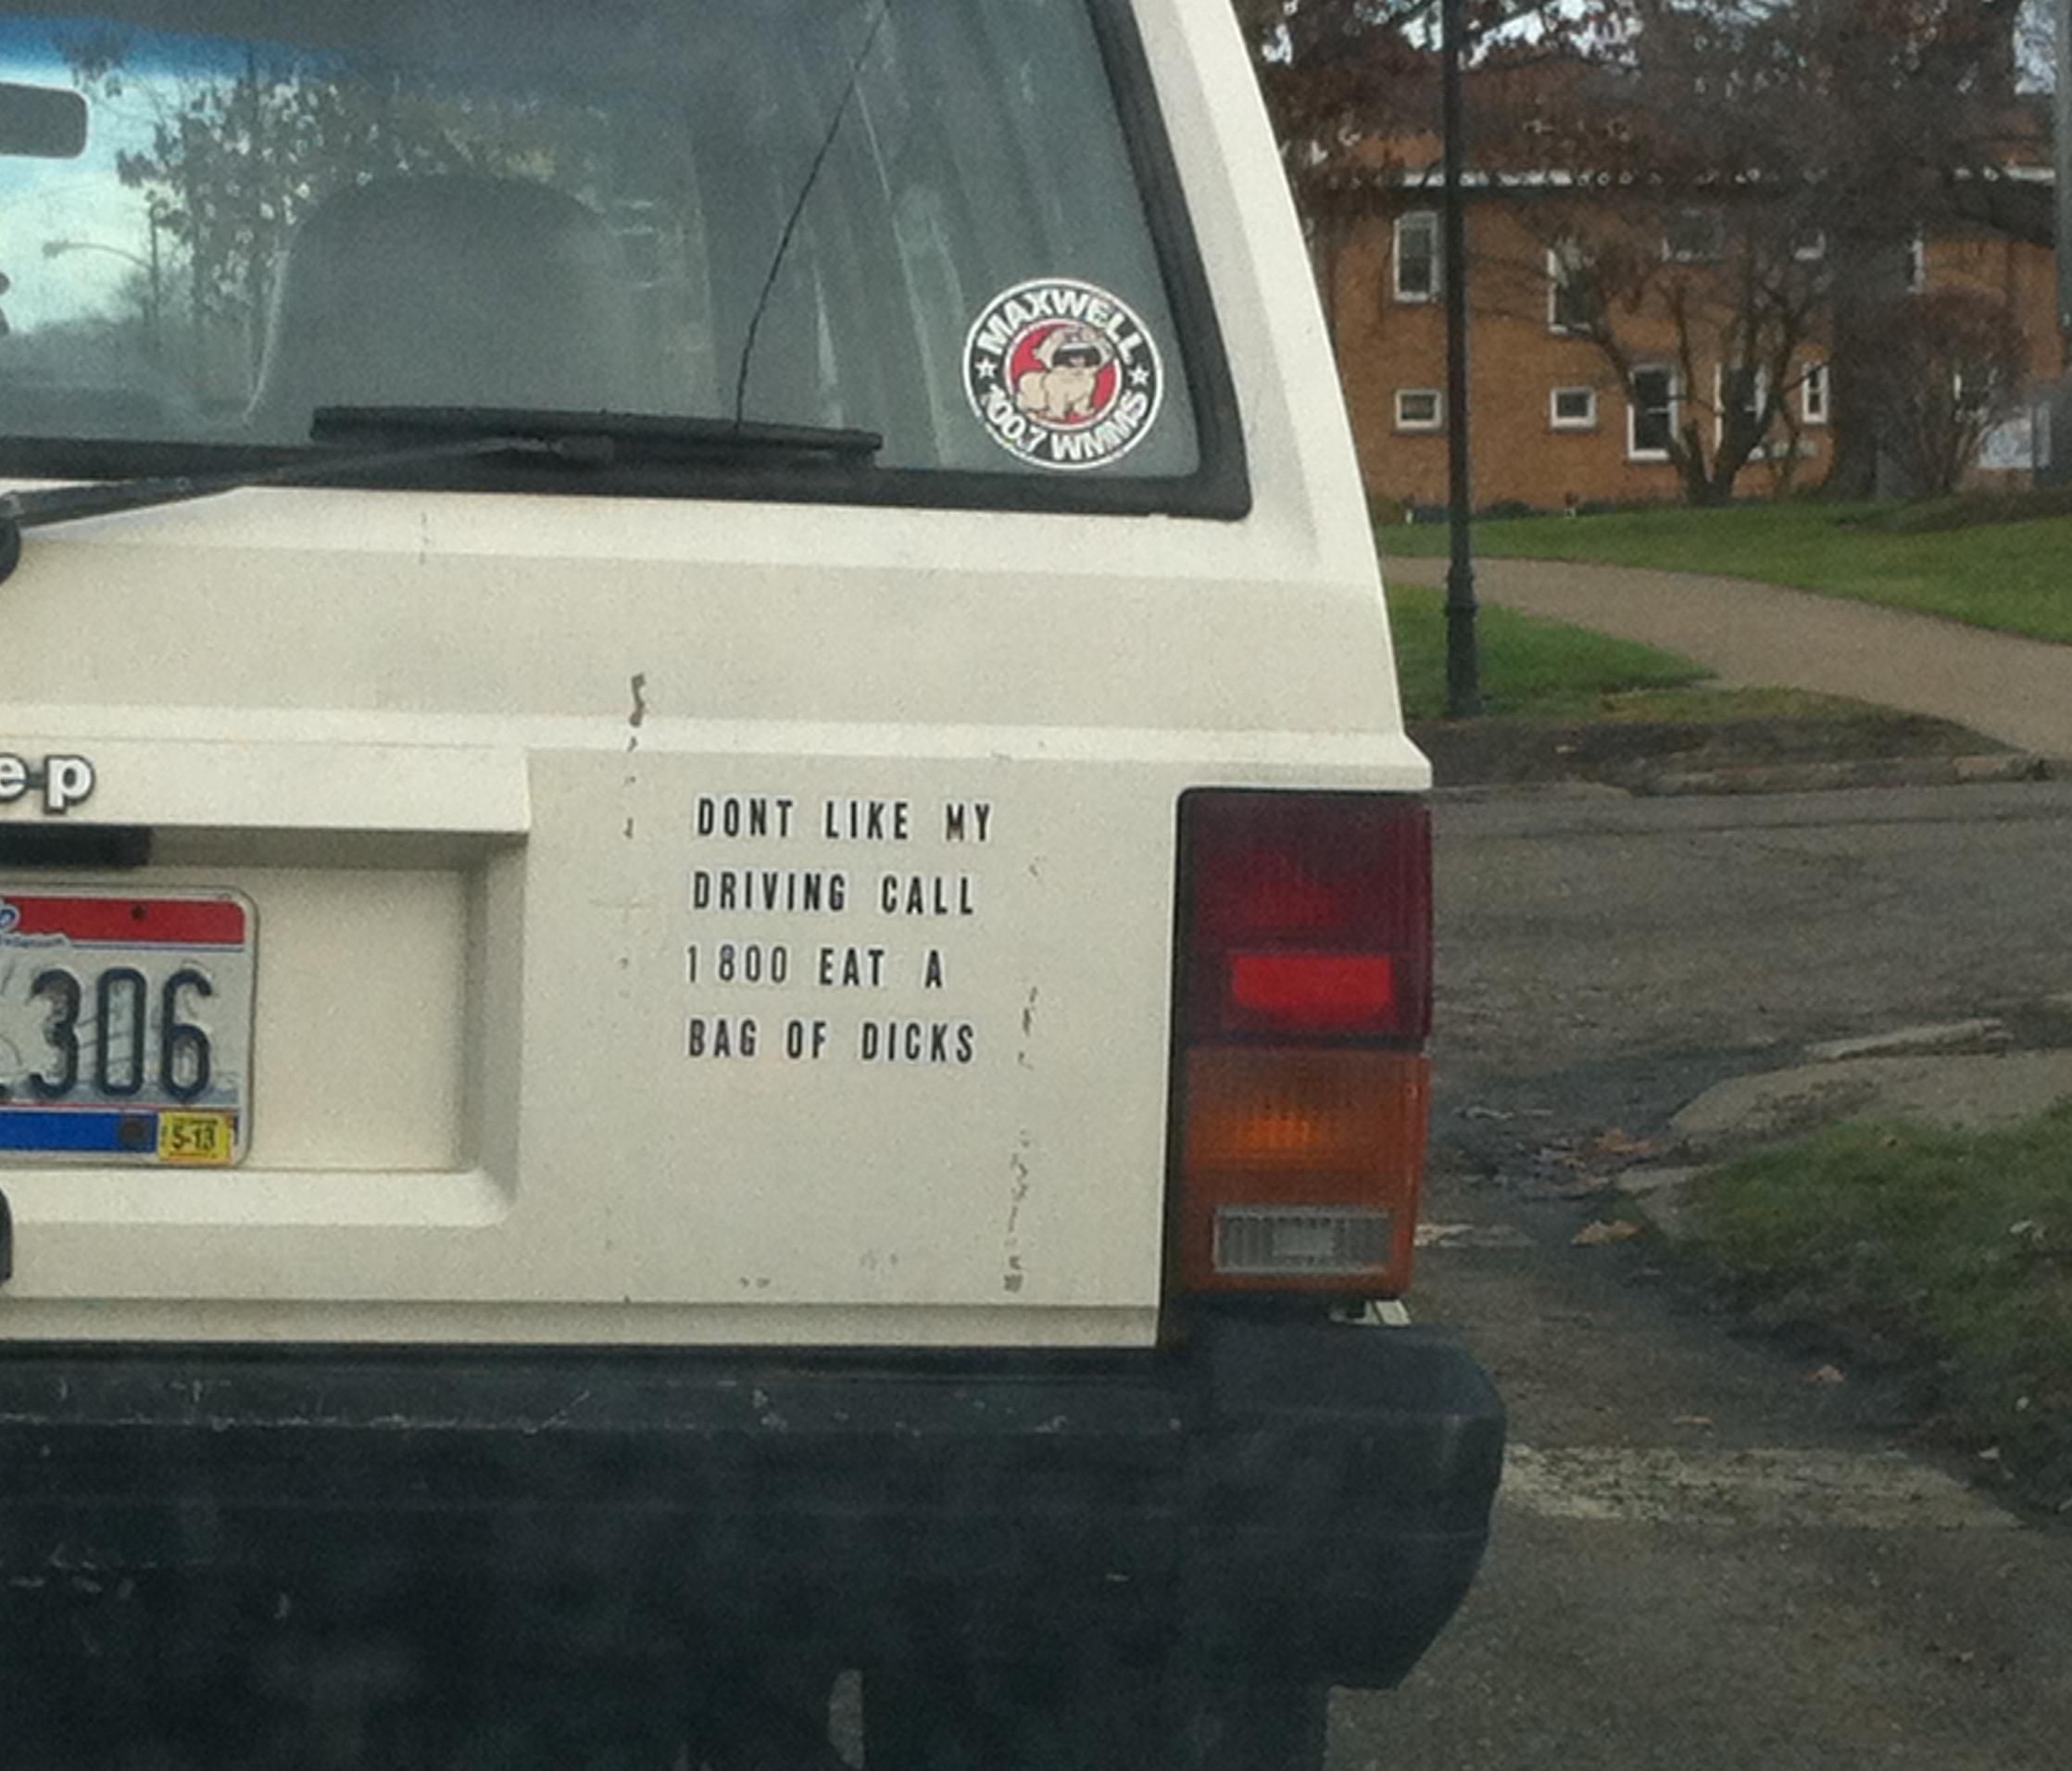 I saw this guy on the road today. Ohio is full of characters.